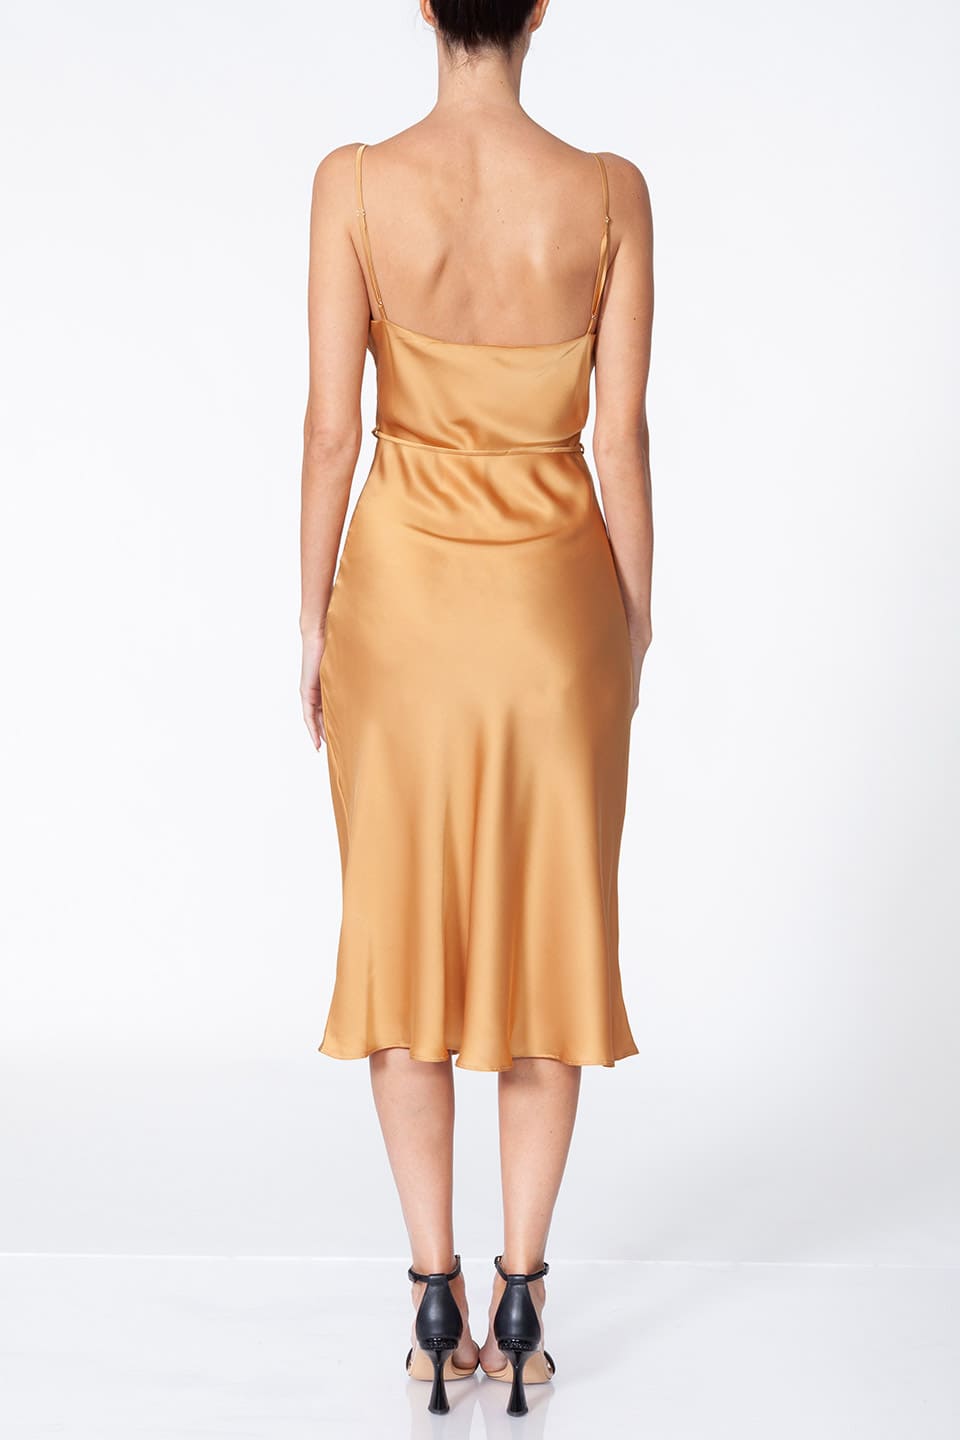 Fashion Stylist Anze's gold midi dress full-body view from behind